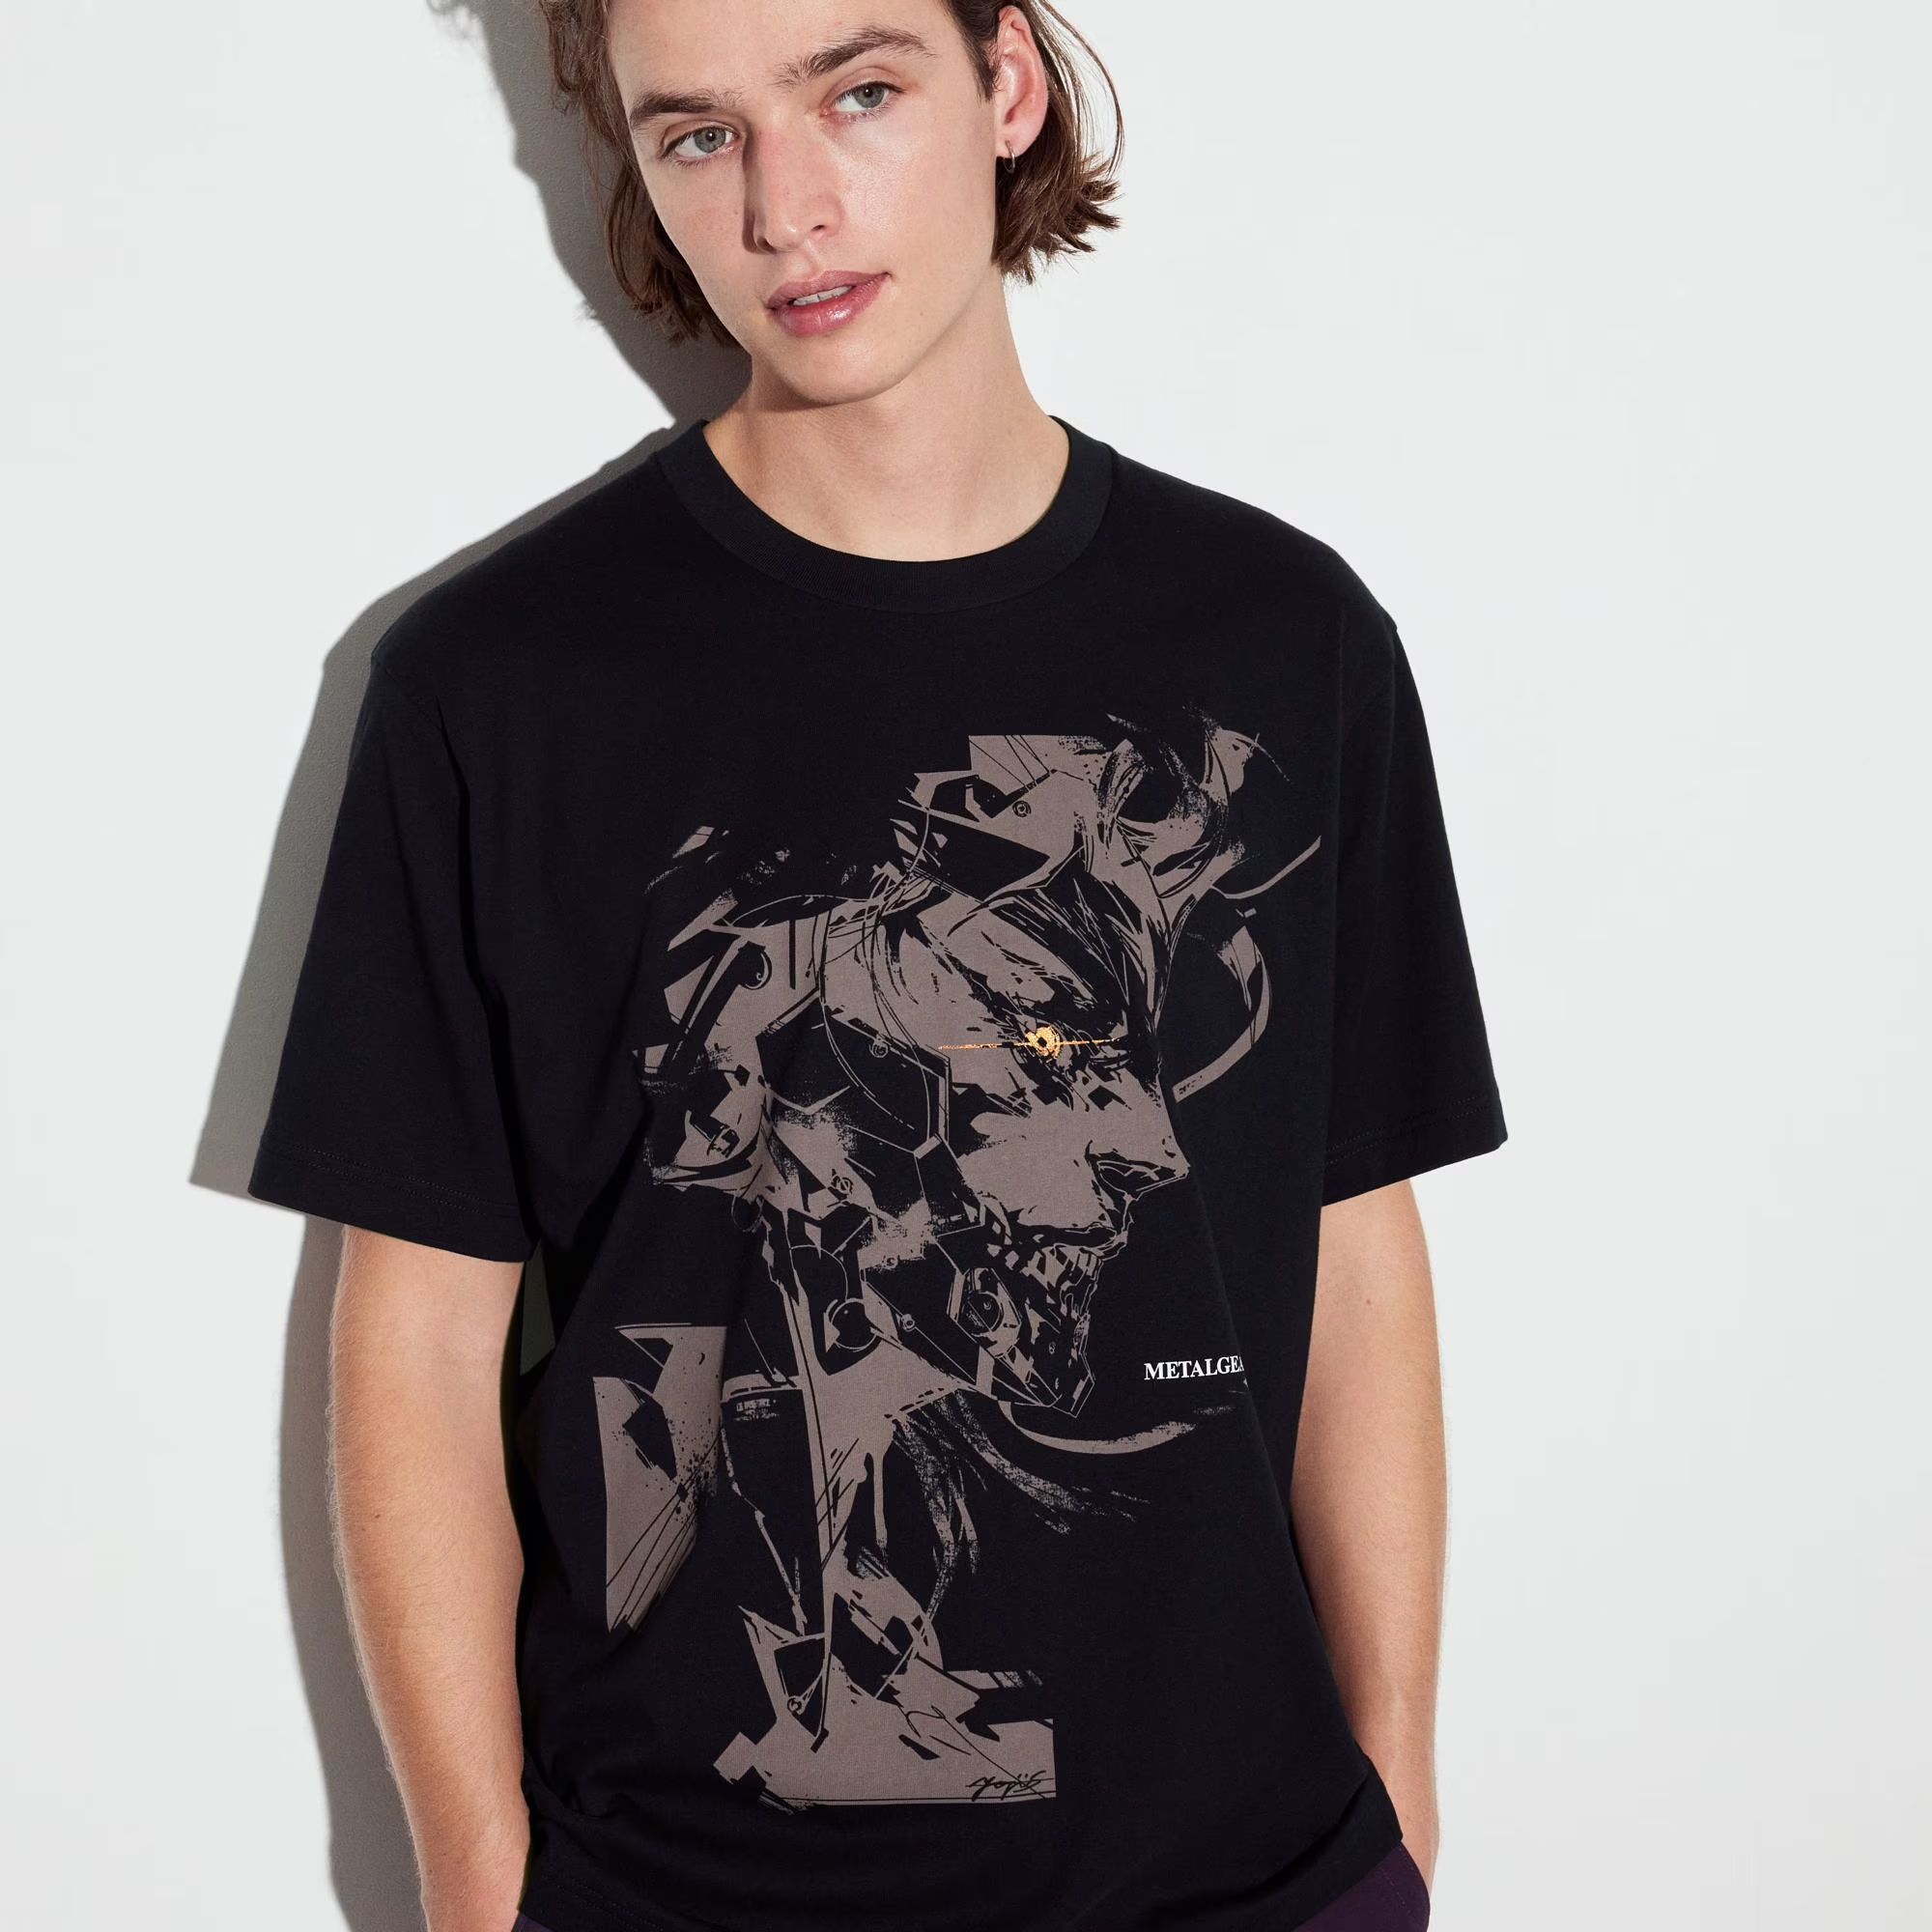 Metal Gear Uniqlo UT T-Shirts Will Be Back Soon - Siliconera